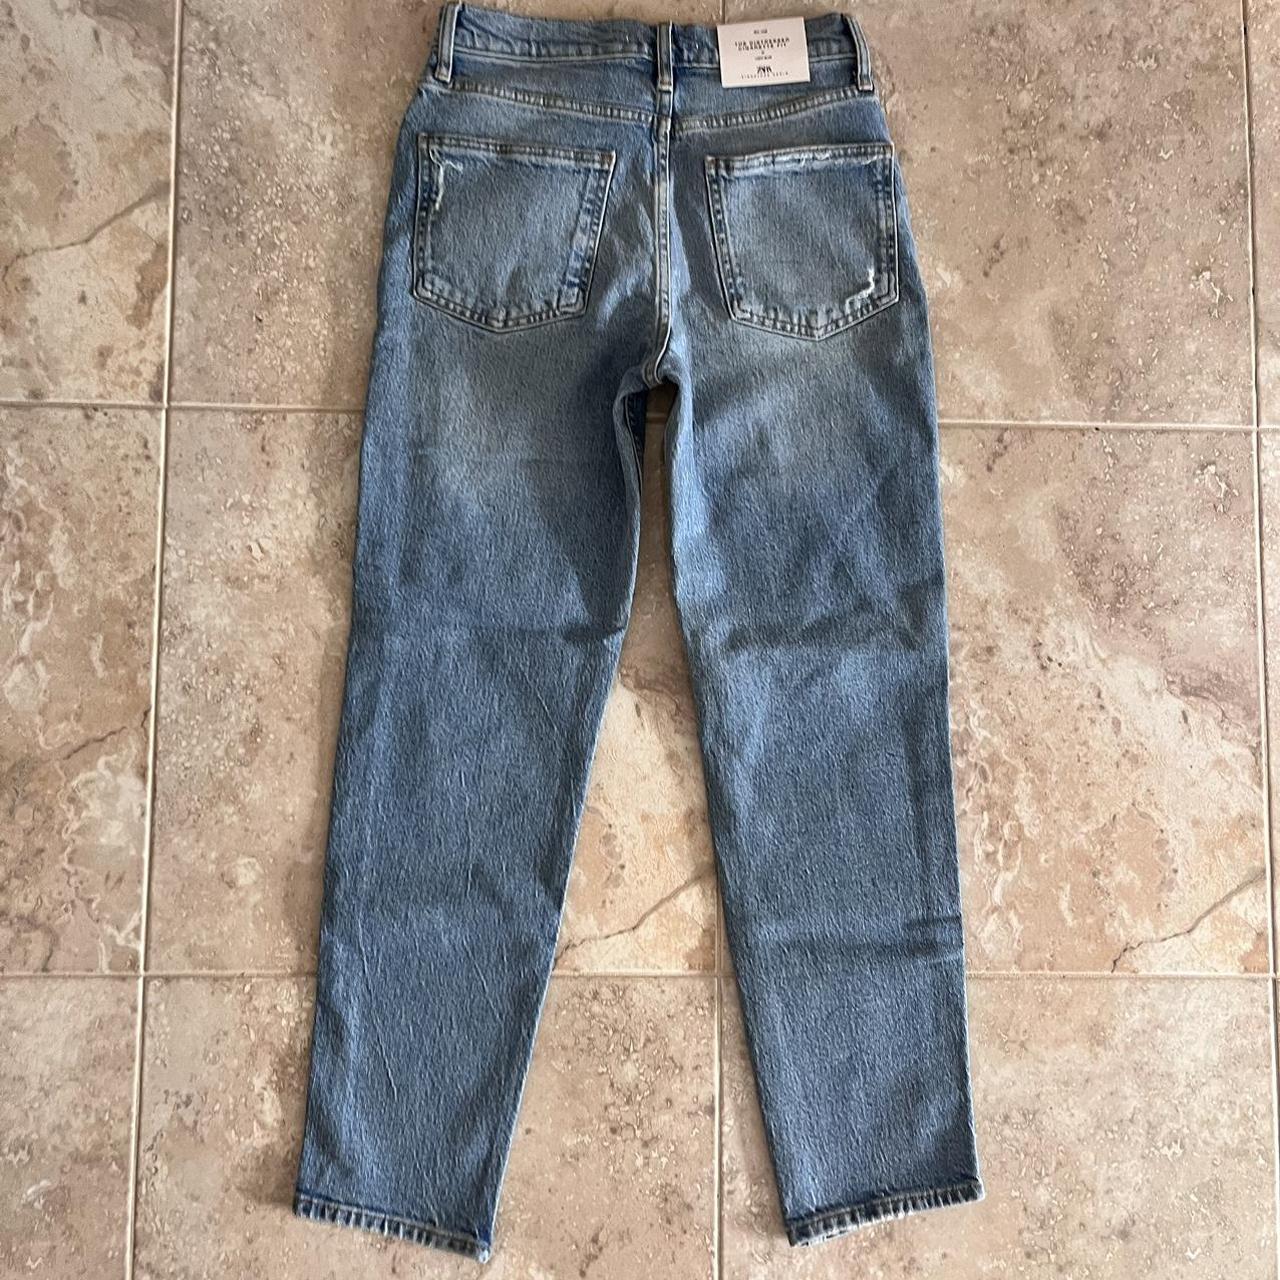 Zara Blue Distressed Mom Jeans ❗️FREE SHIPPING ON - Depop